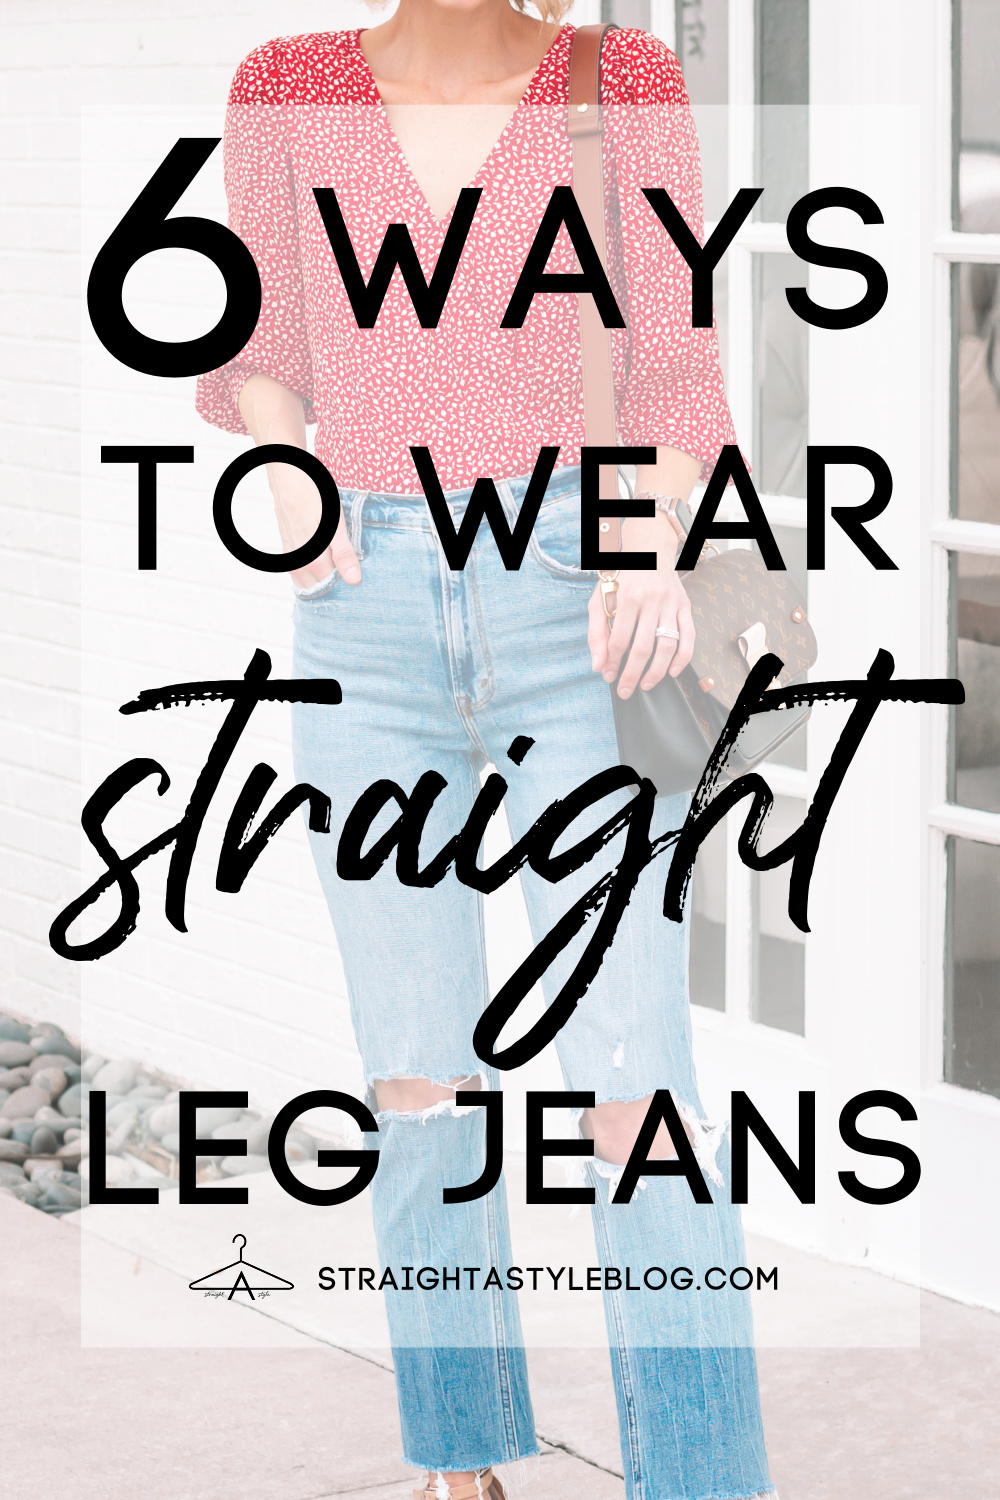 Outfits in Real Life: Straight Jean Style